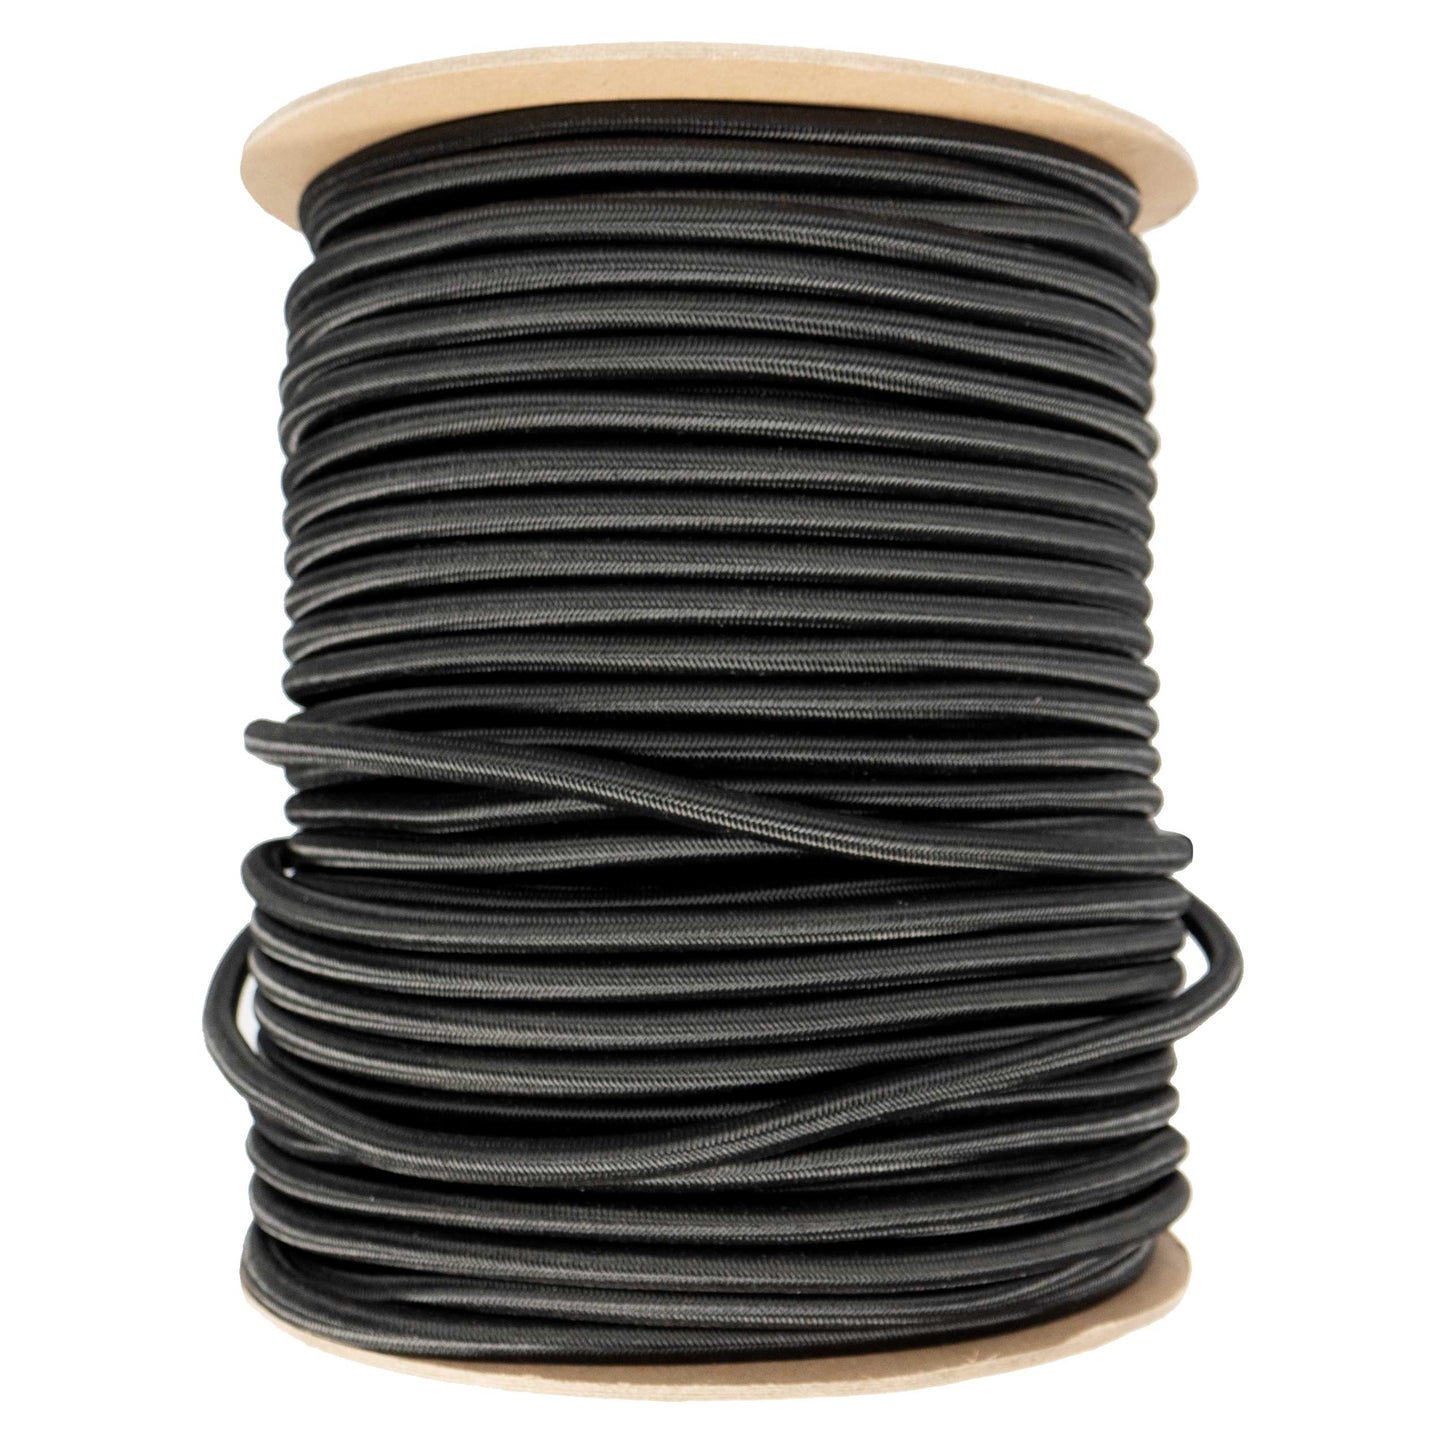 38 foot foot9mm Black Polyester Shock Cord Spool (300 foot) image 1 of 8